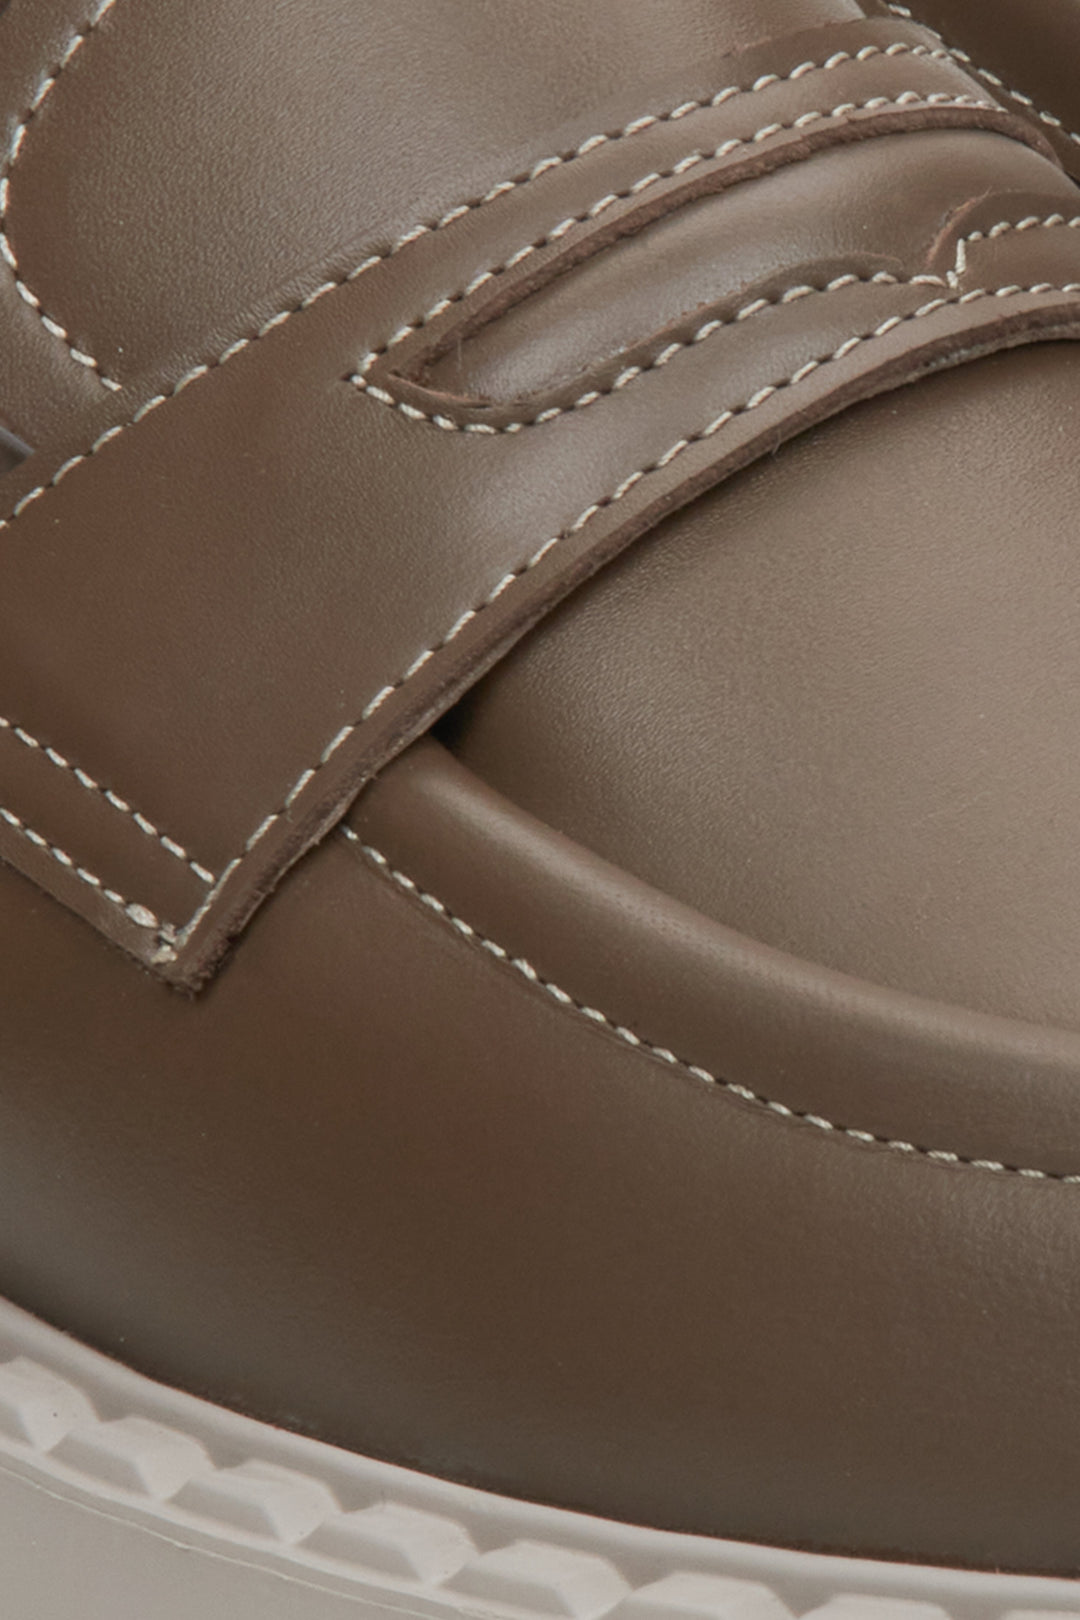 Loafers crafted from rich brown leather - close-up on a heel counter.